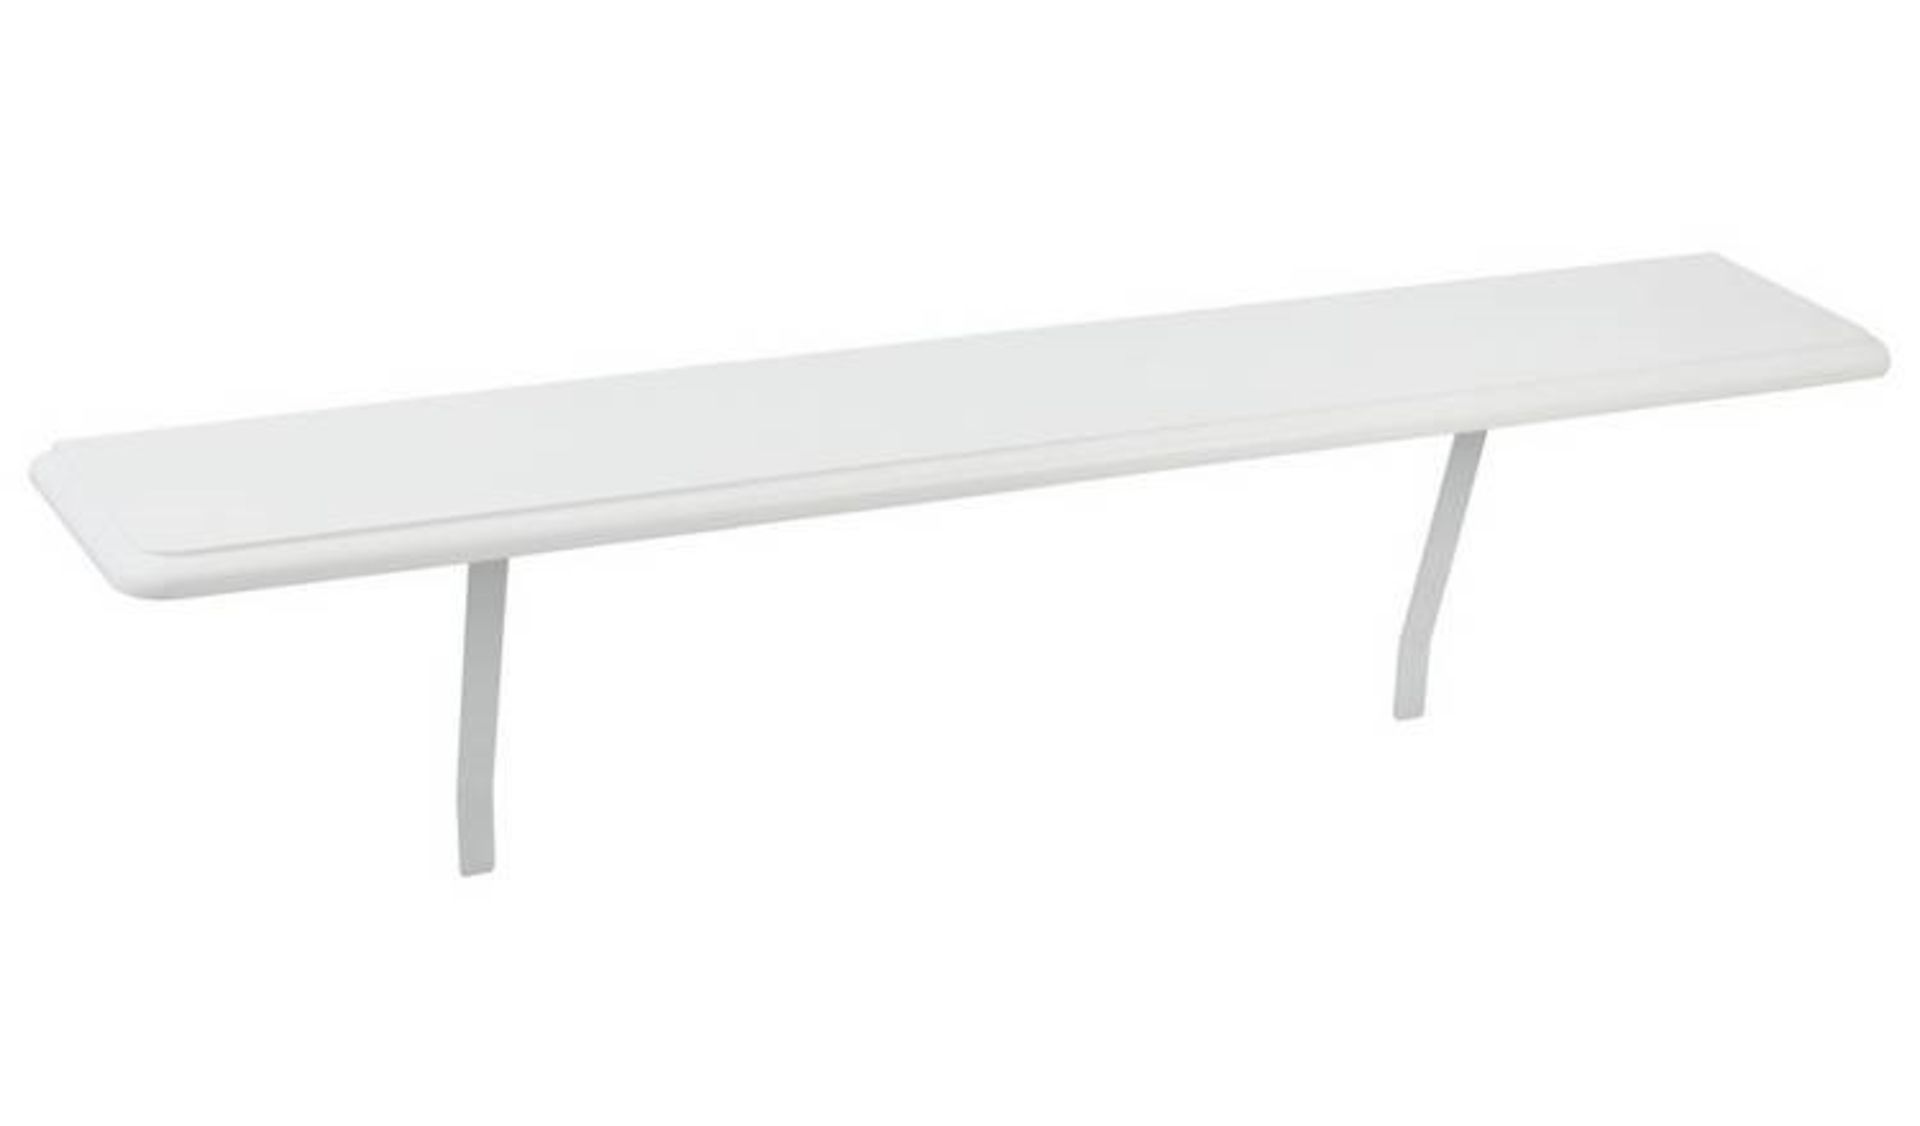 1 SEALED SMALL RADIATOR SHELF IN WHITE (PUBLIC VIEWING AVAILABLE)